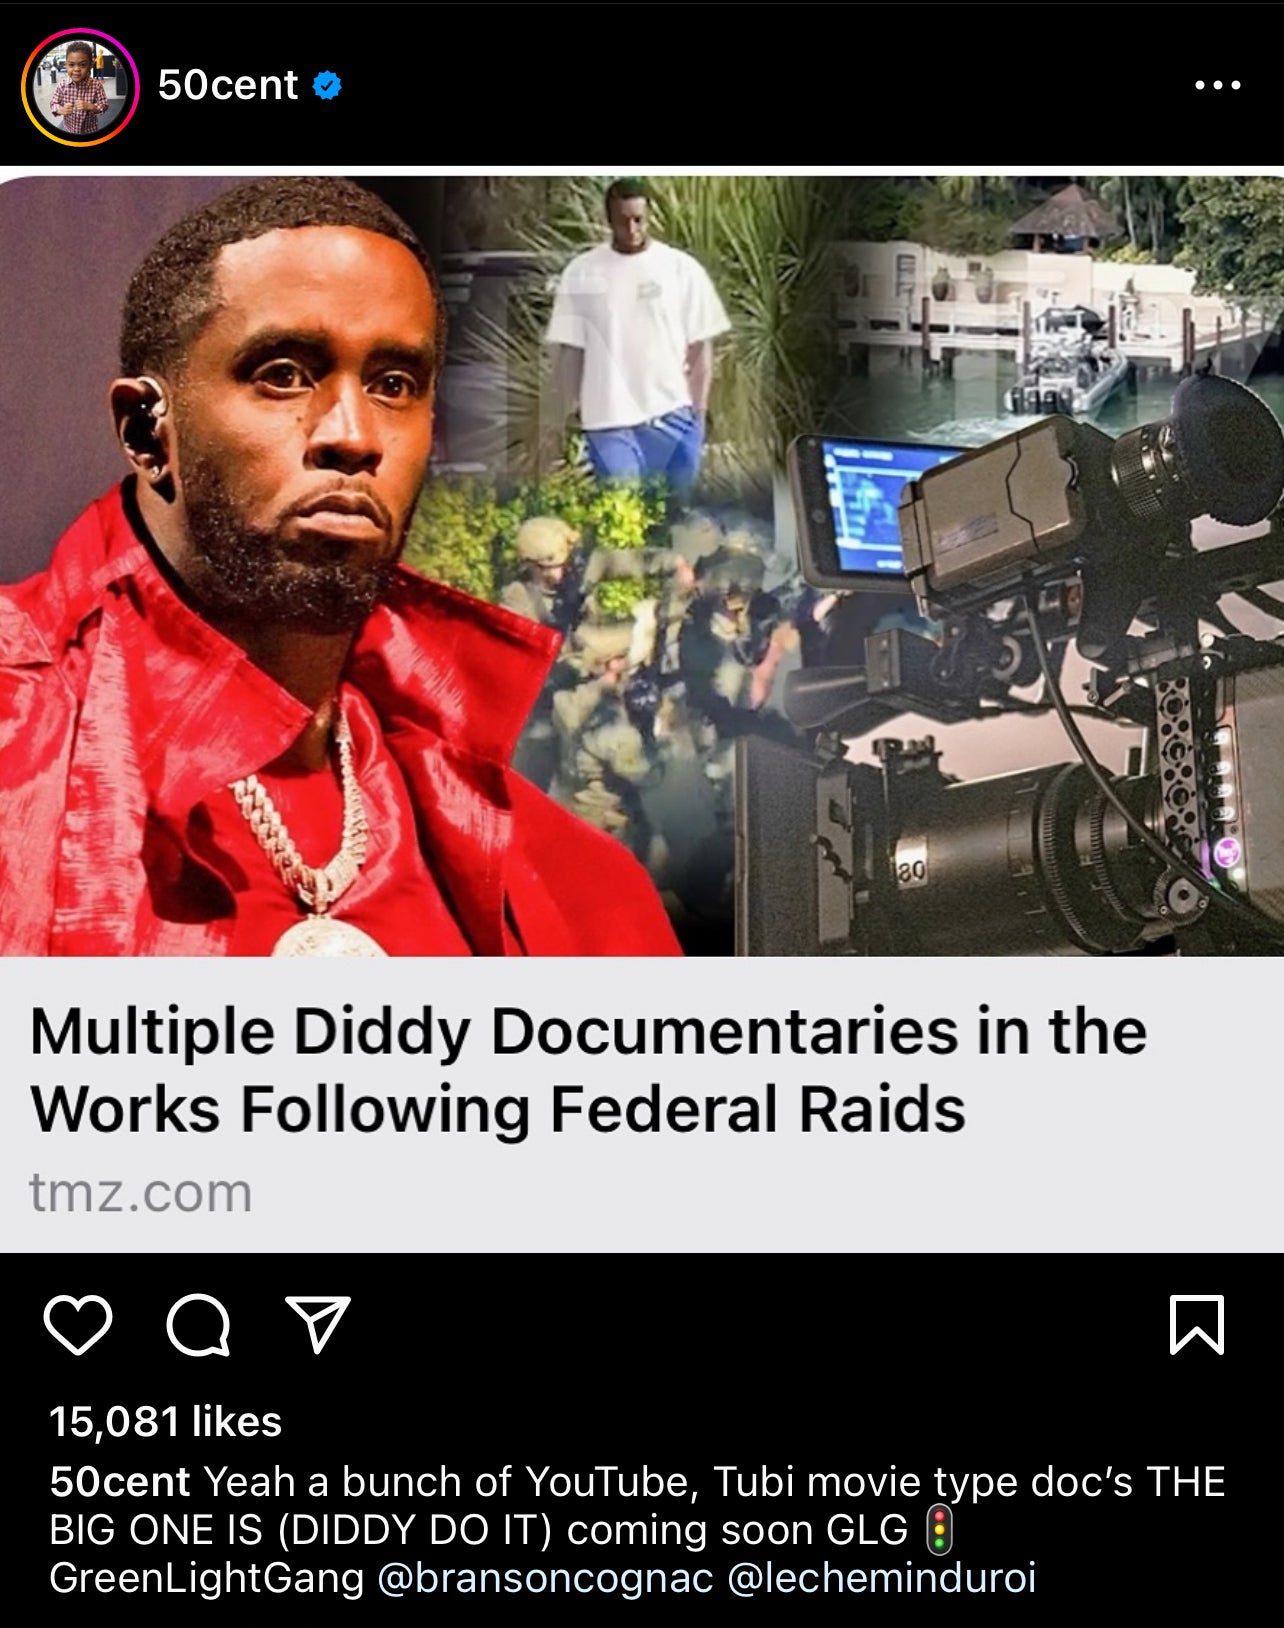 Sean Combs in a red jacket with fur collar, on TMZ article about music documentaries